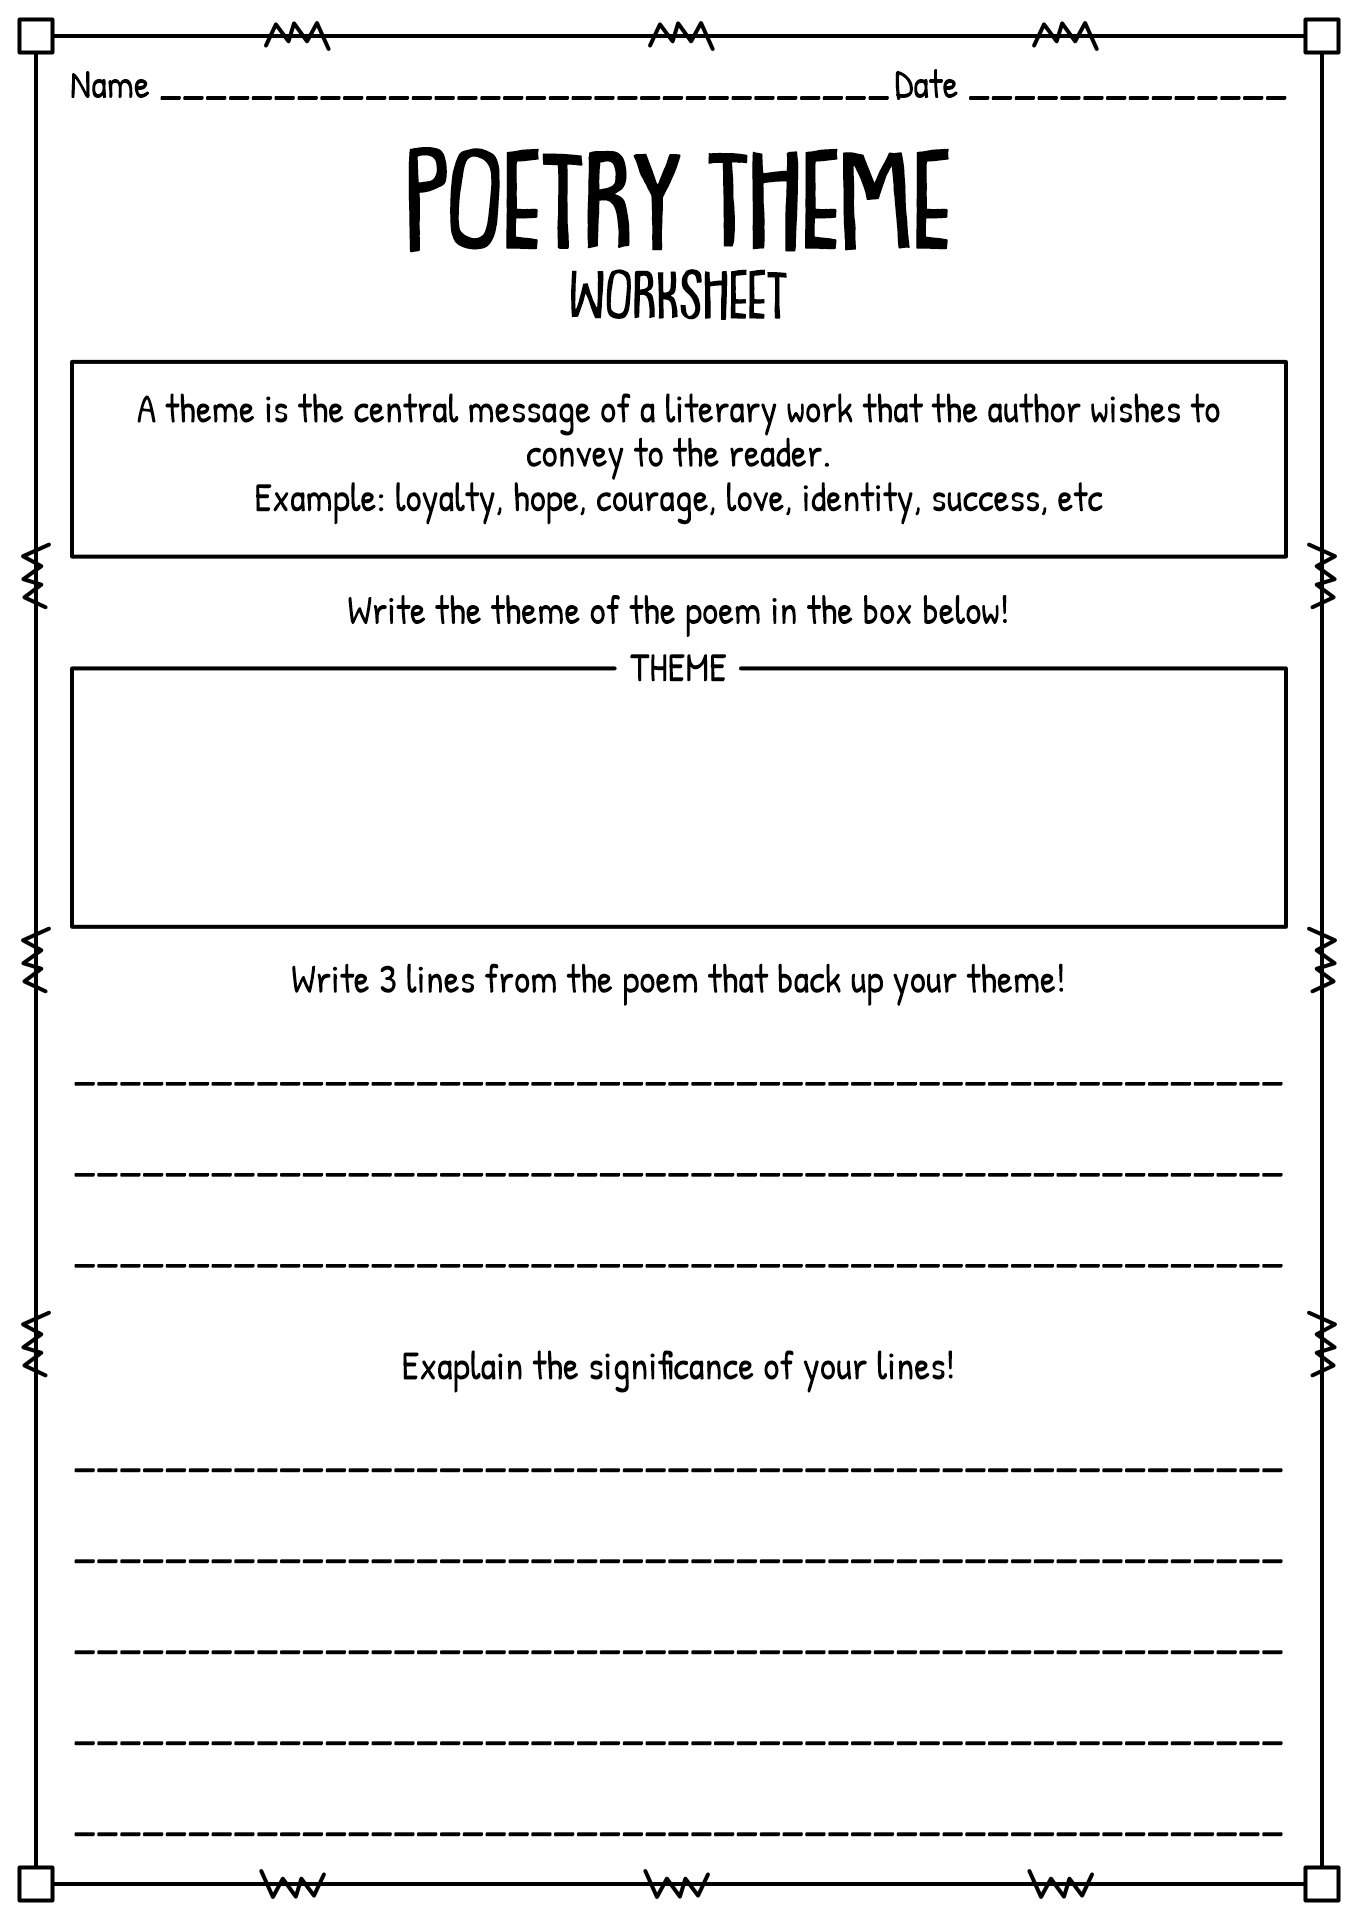 Poetry Worksheet For English Learners